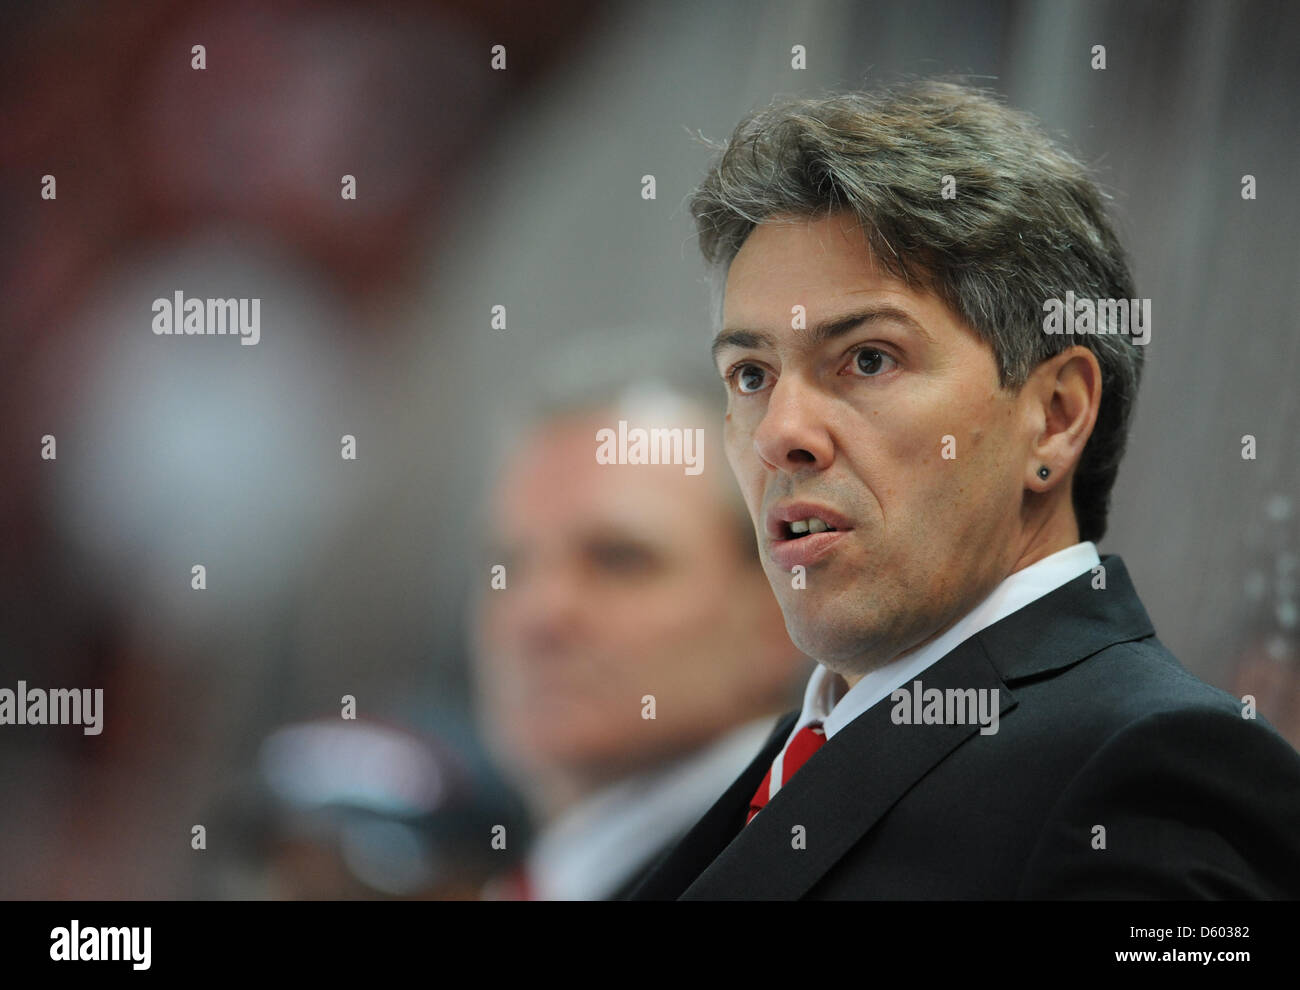 Switzerland's national co-coach Markus Studer is pictured during the ice hockey Deustchland Cup match between Canada and Switzerland at the Olympic Ice Stadium in Munich, Germany, 11 November 2012. Photo: ANDREAS GEBERT Stock Photo